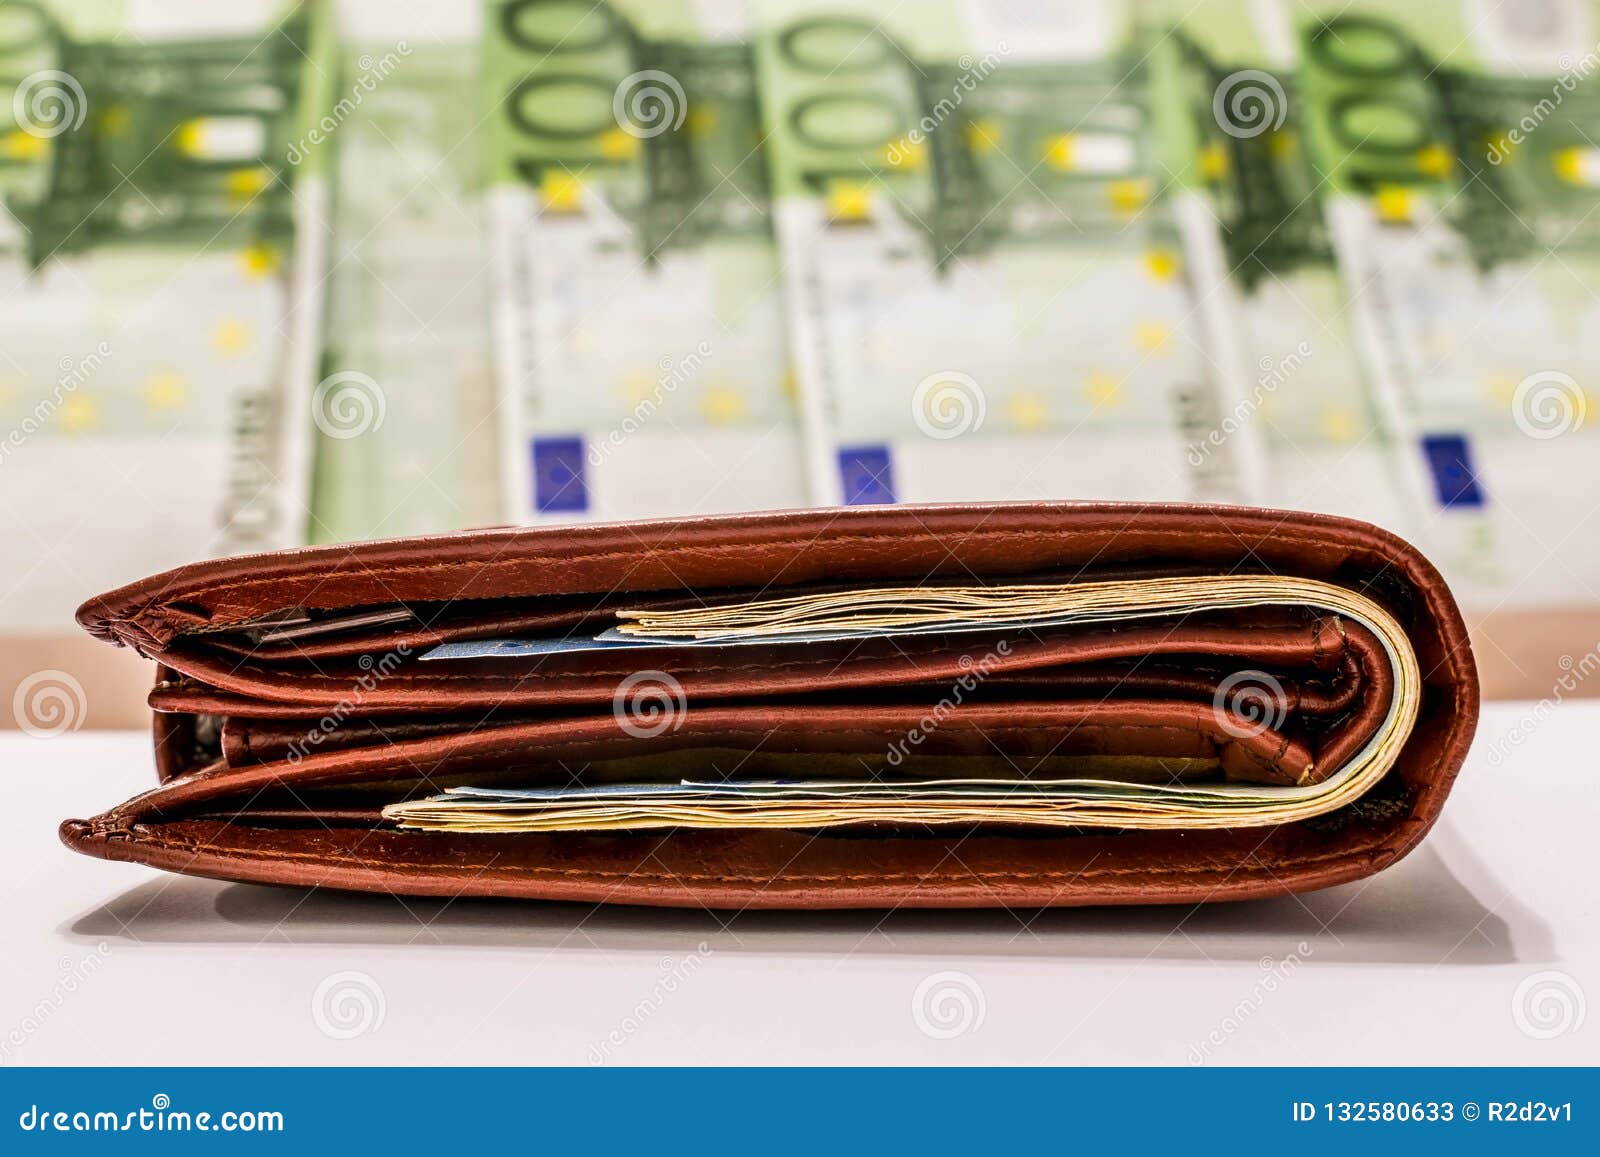 Wallet With Euro Banknotes. European Union Money Stock Image - Image of cash, money: 132580633